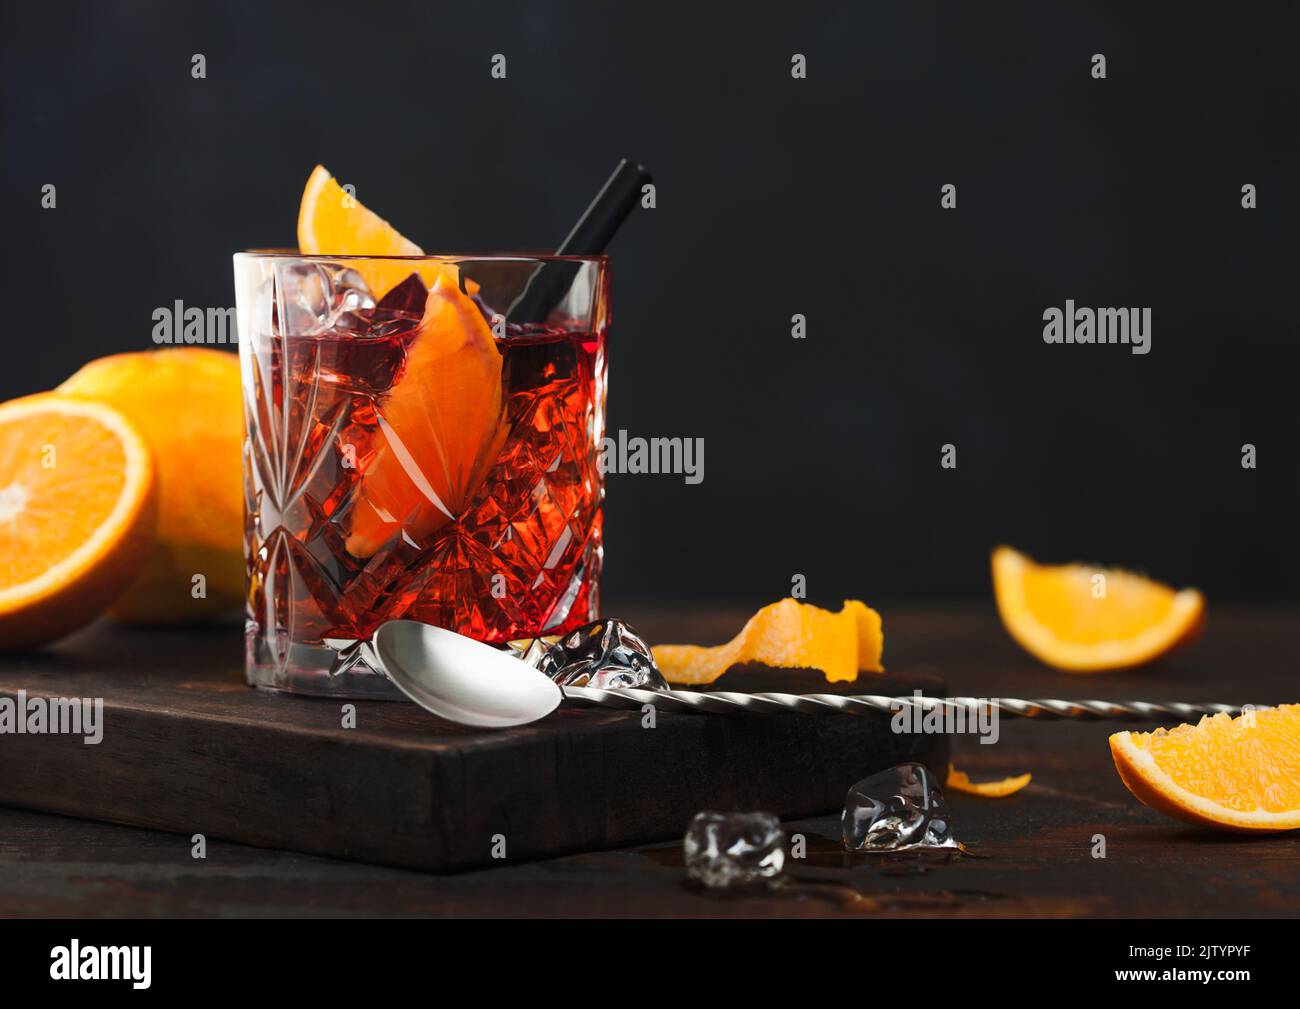 Negroni cocktail in crystal glass with orange slice and fresh raw oranges on chopping board with spoon on wooden background. Stock Photo